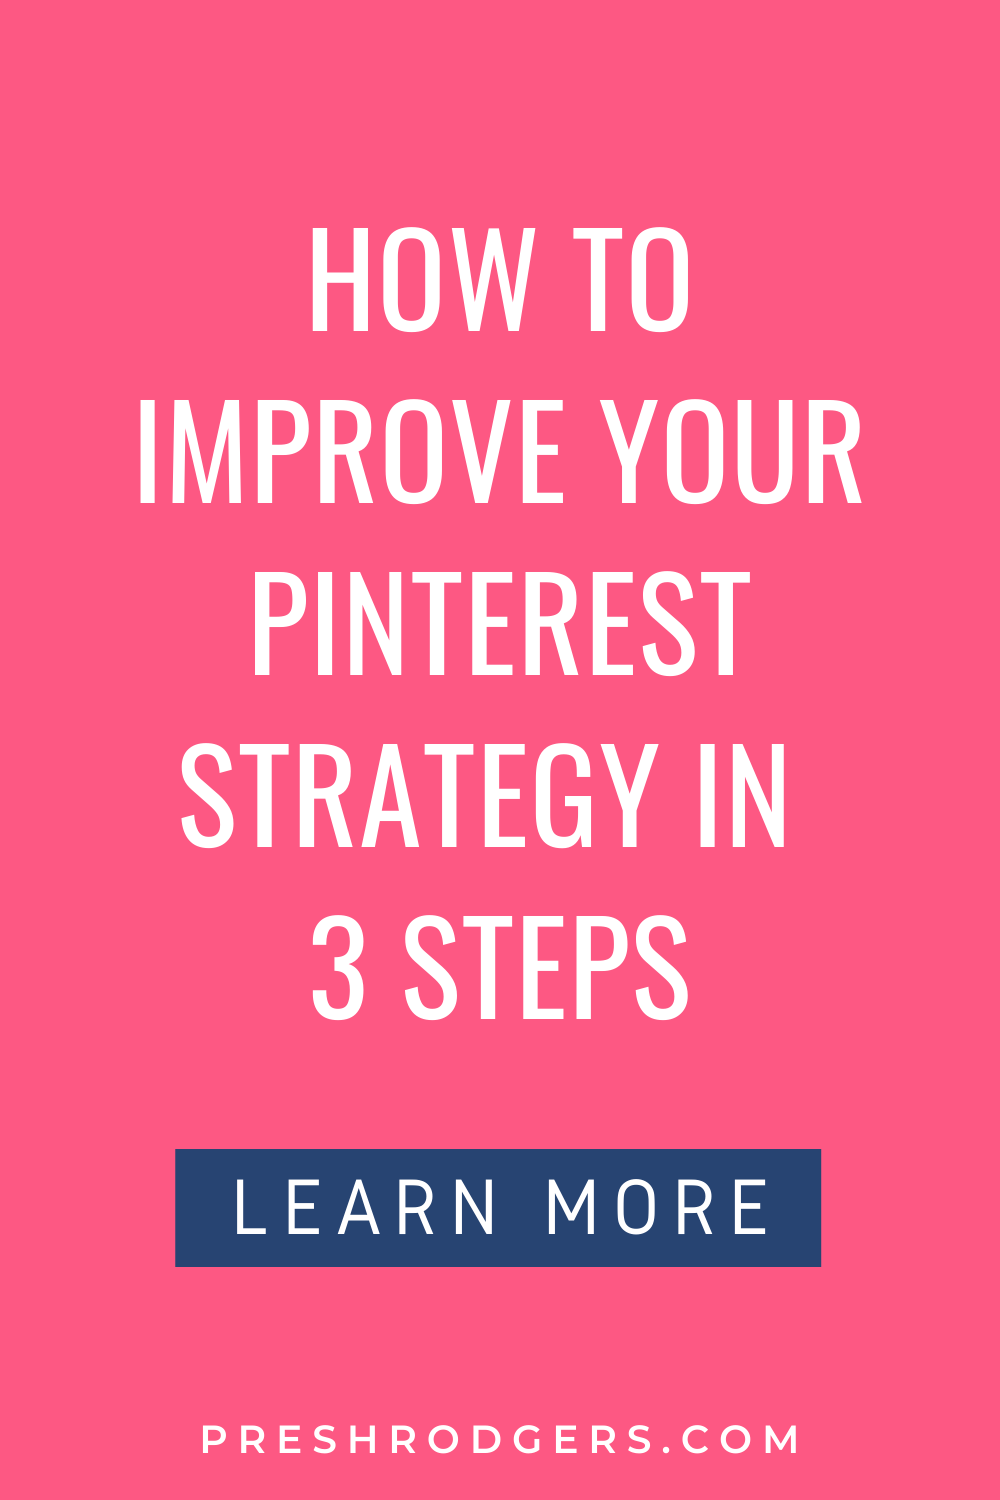 3 Tips to Improve Your Pinterest Strategy for Profit – The Pinning Oasis